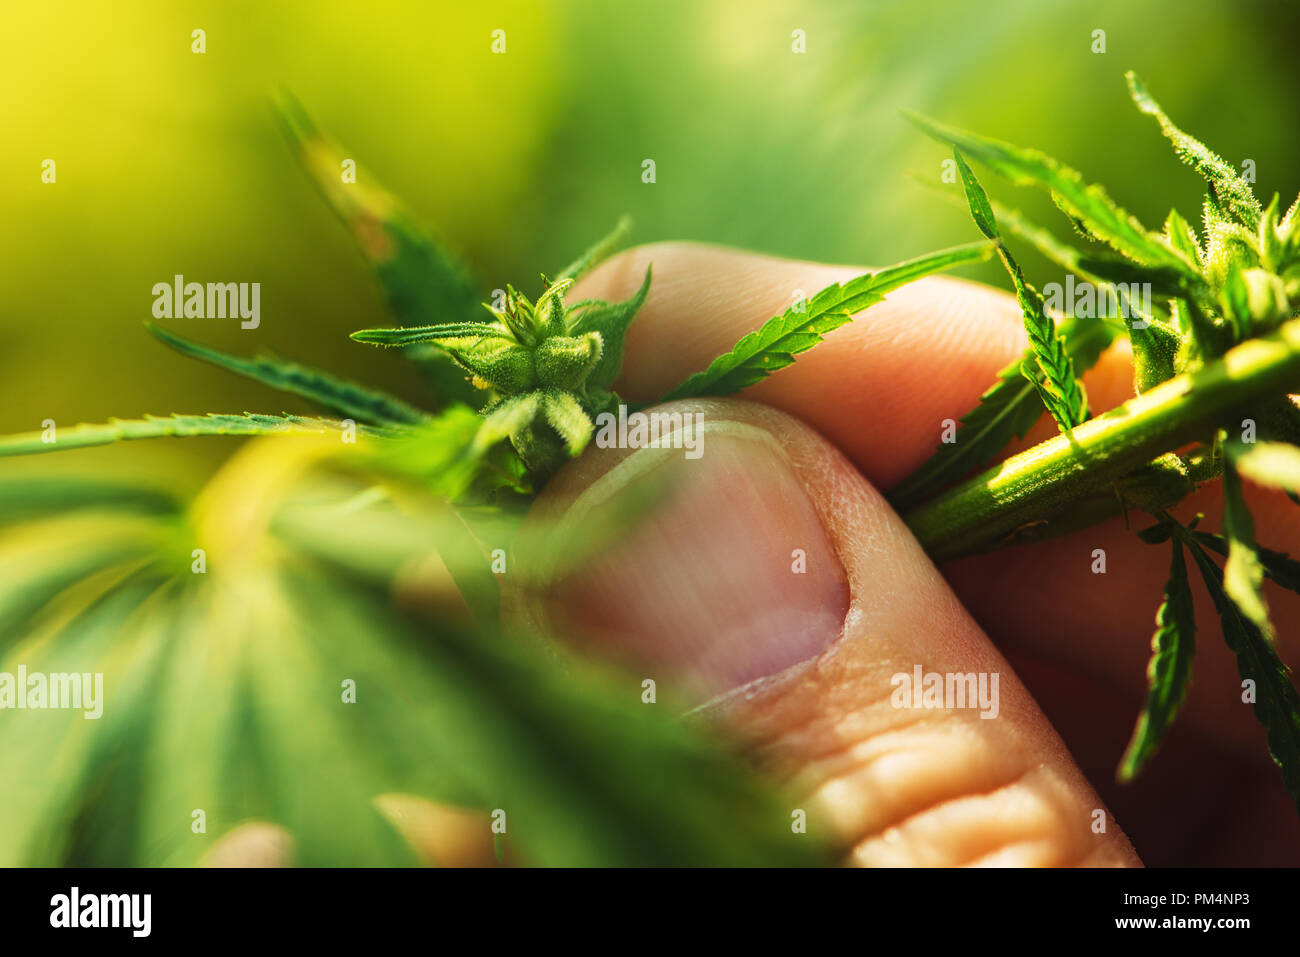 Farmer is examining cannabis hemp male plant flower development, extreme close up of fingers touching delicate herb part Stock Photo